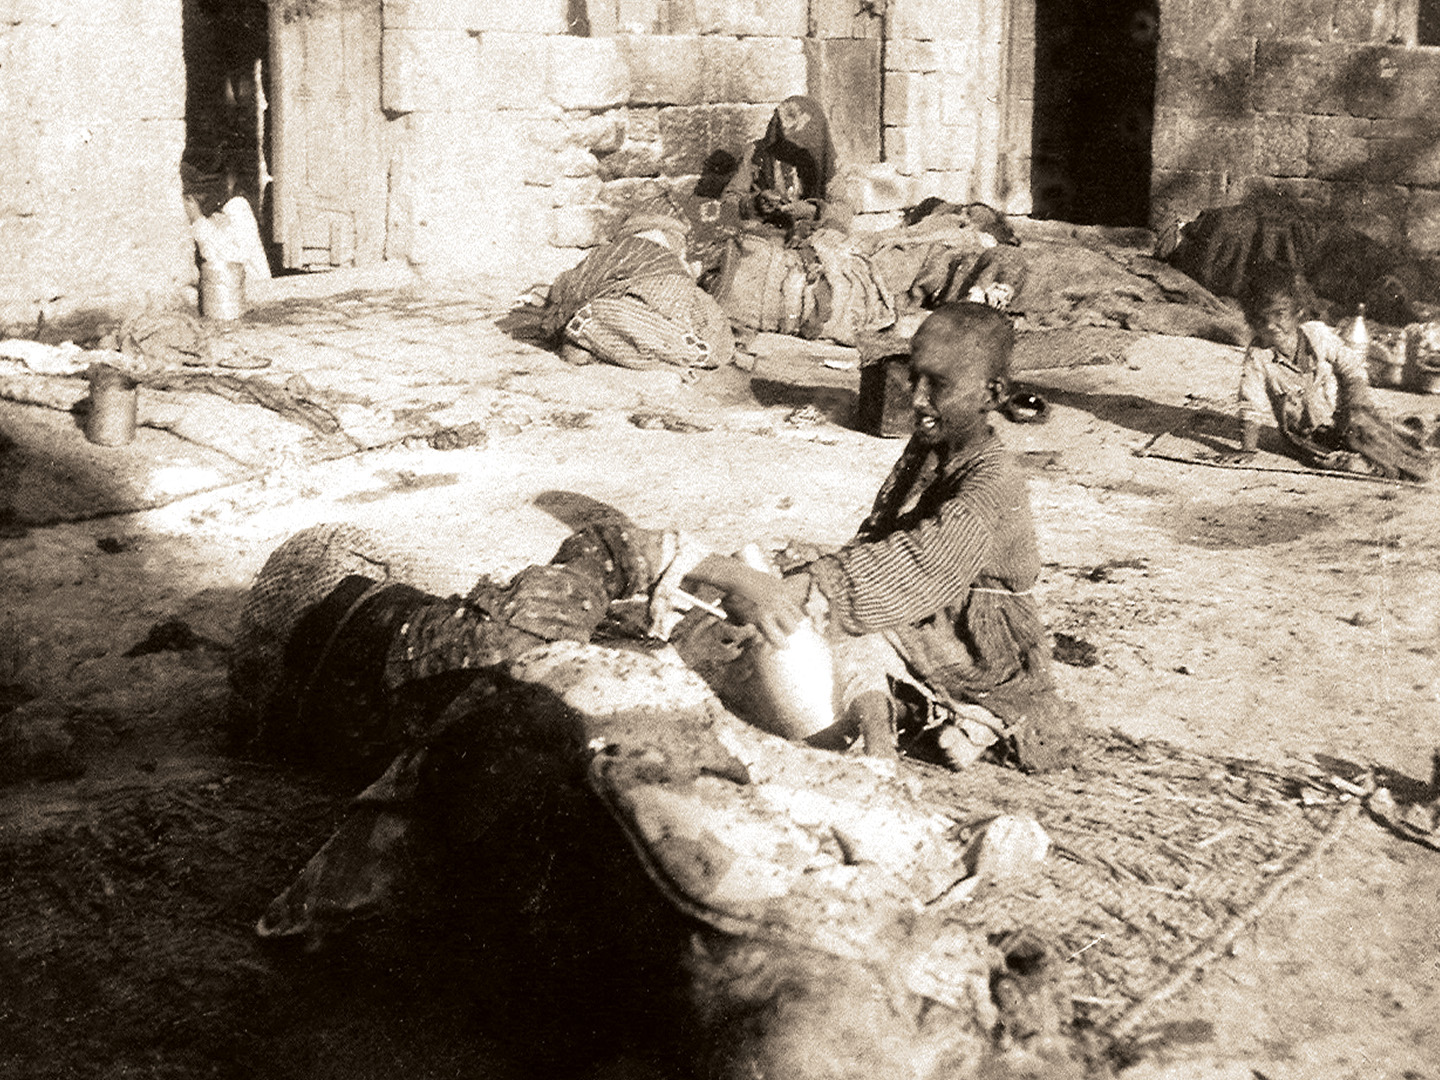 Armenian refugees in the street in Aleppo in the fall of 1915.